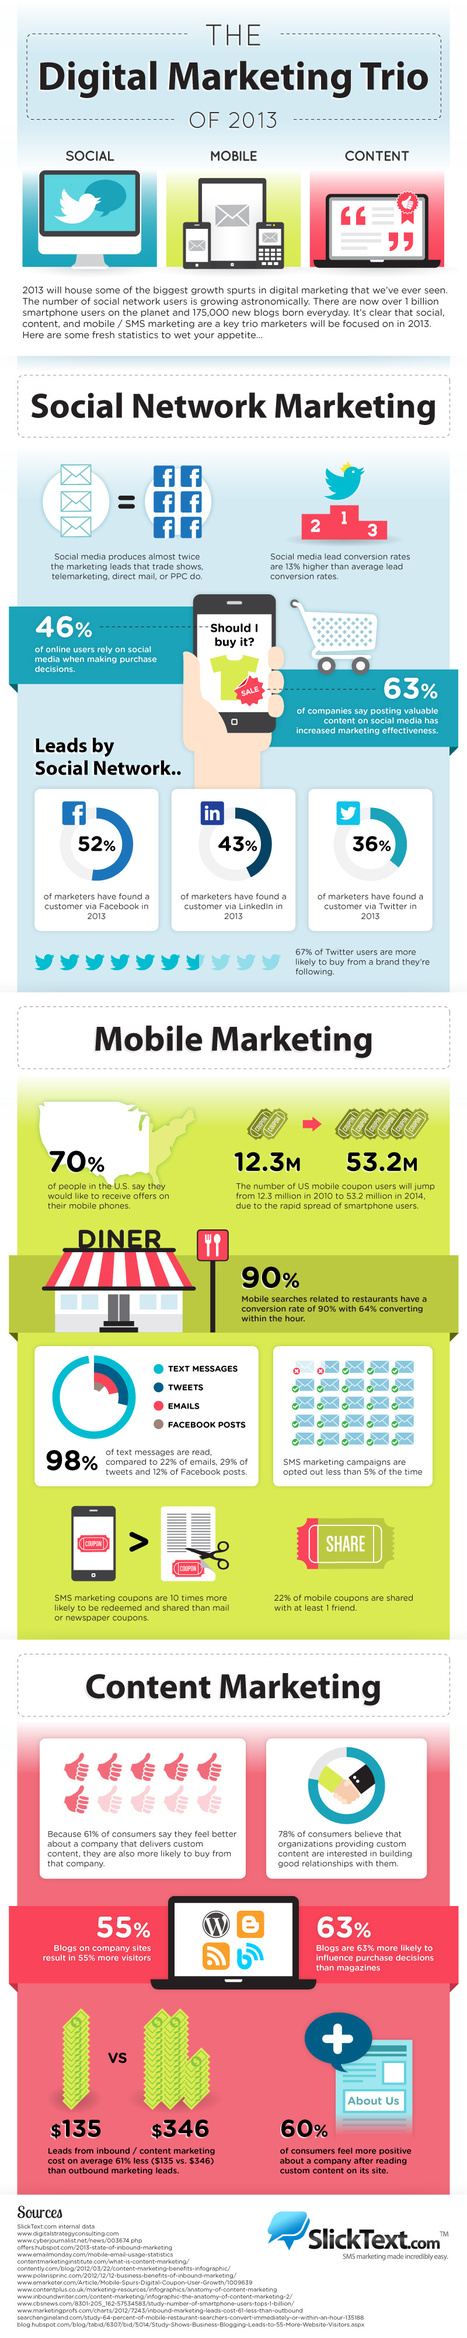 The Digital Marketing Trio Of 2013 [Infographic] | Time to Learn | Scoop.it